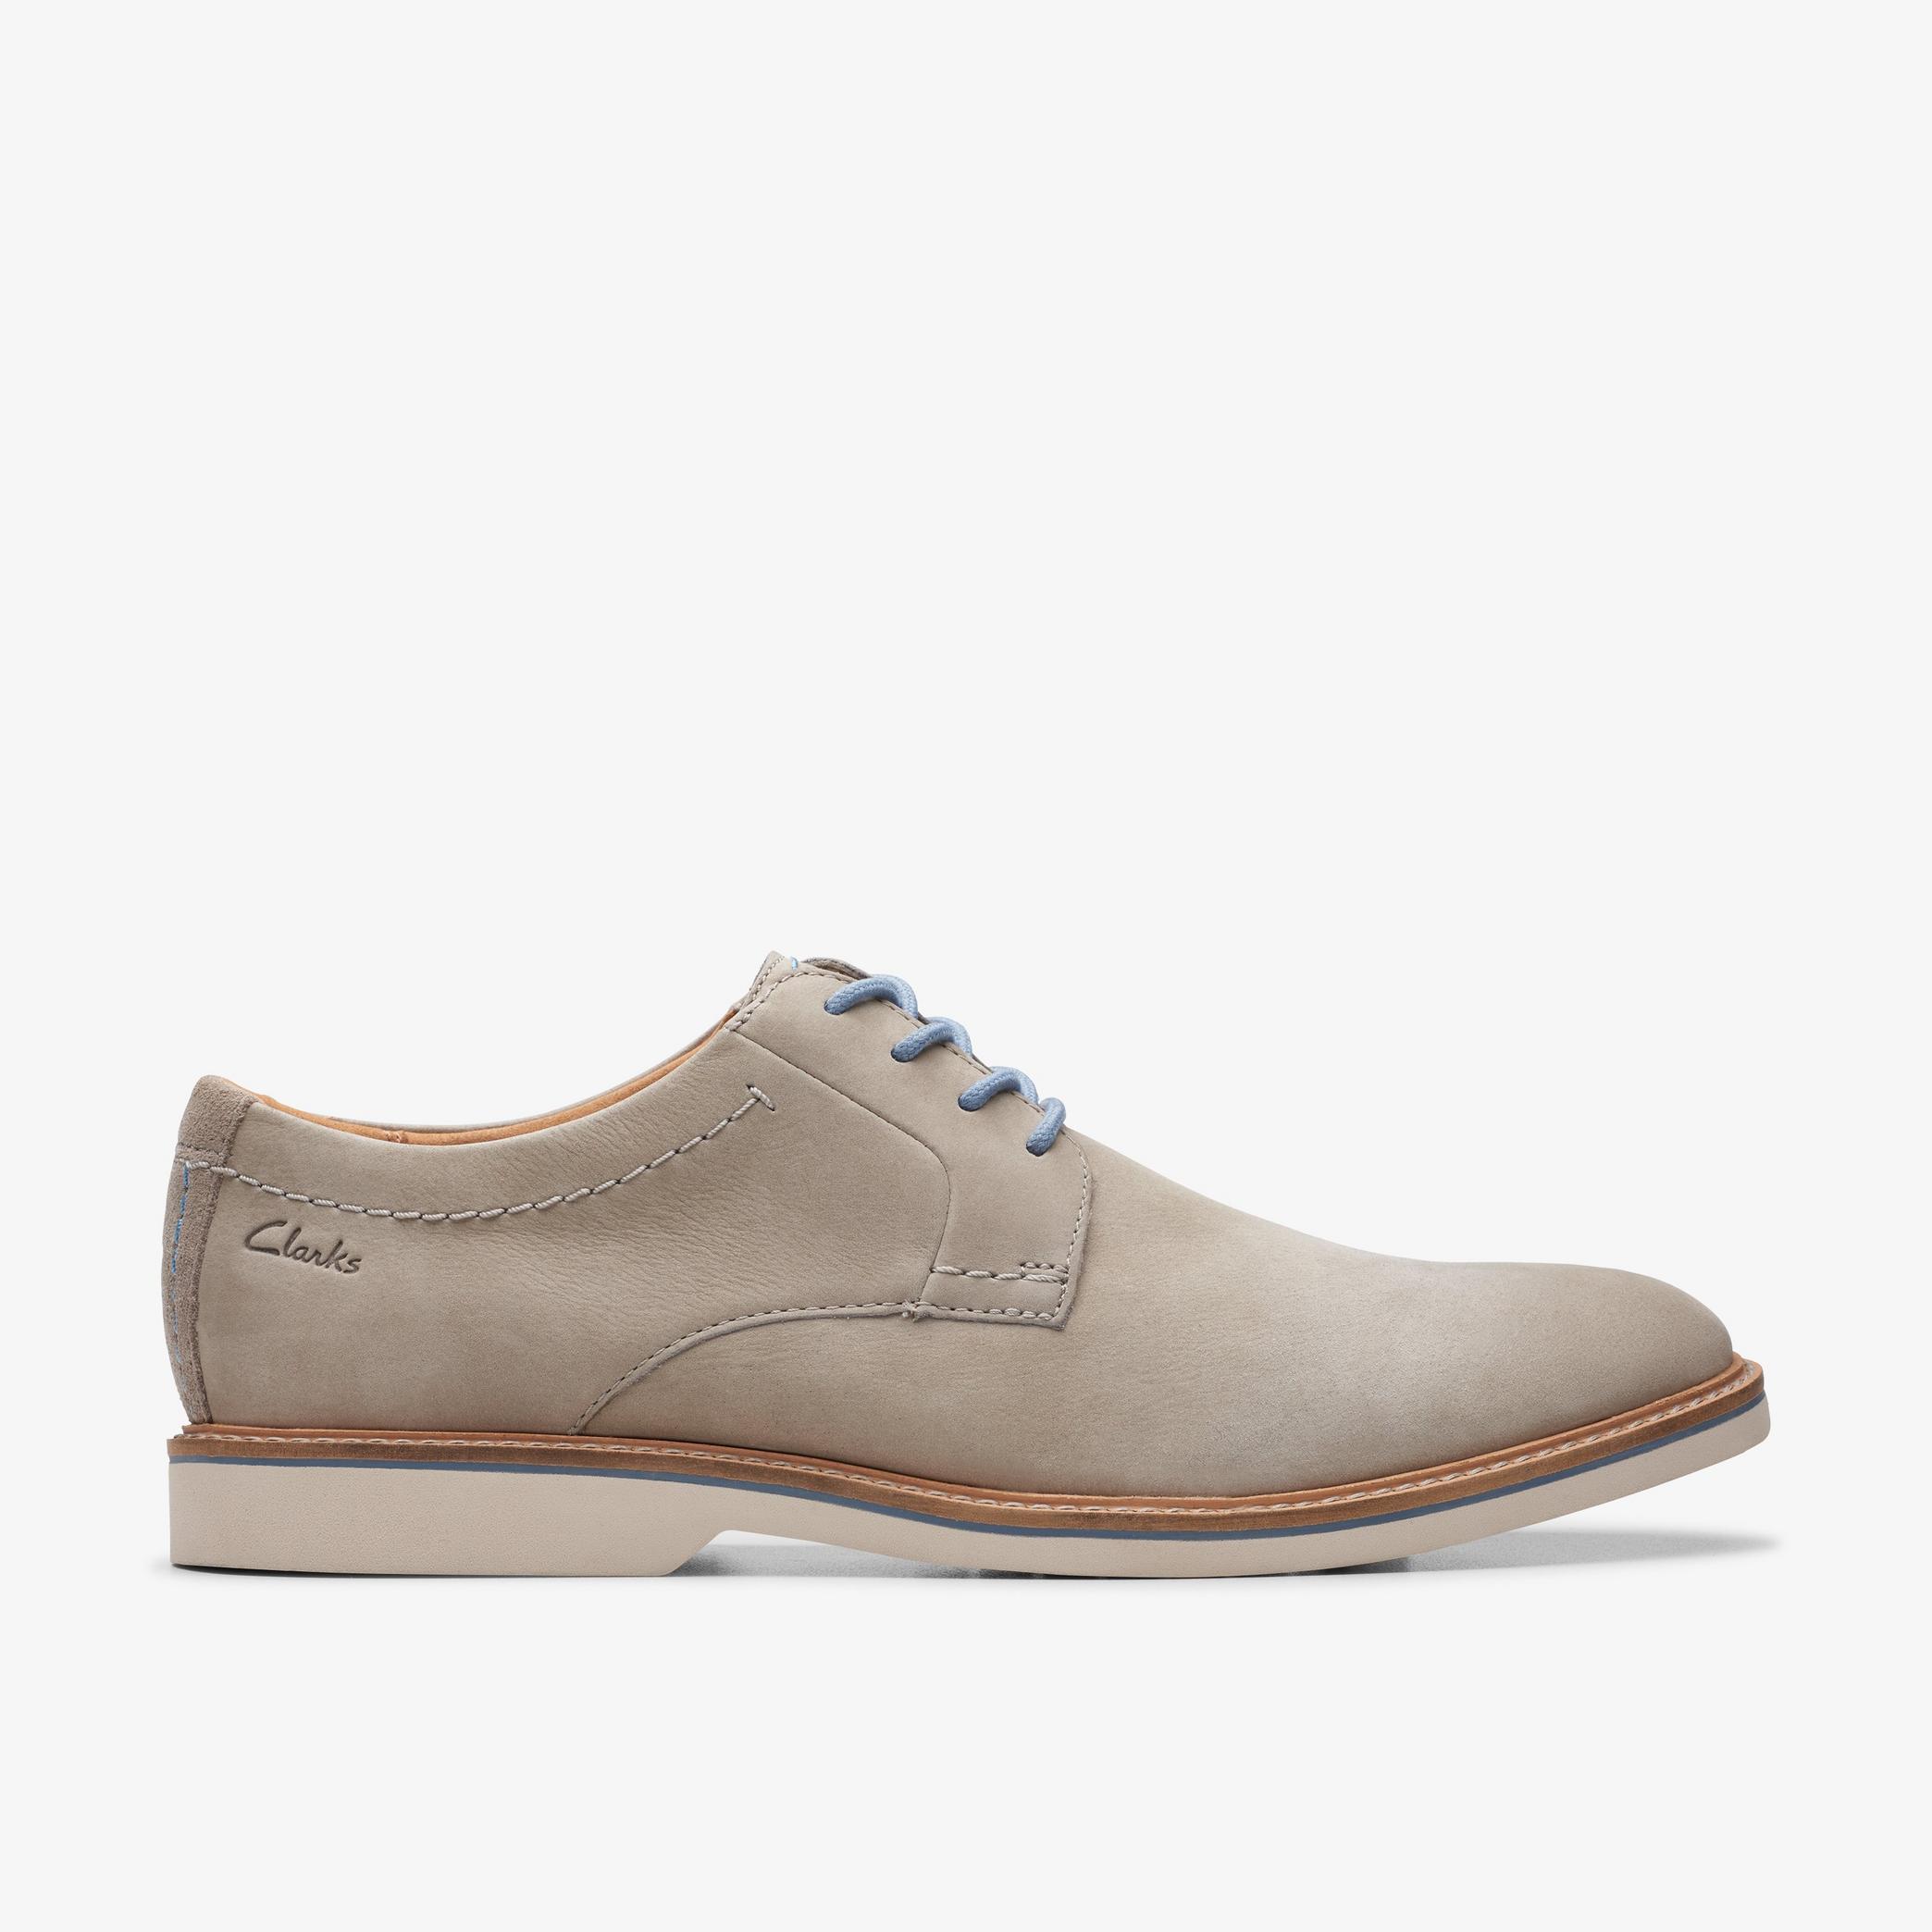 Atticus LT Lace Grey Nubuck Oxford Shoes, view 1 of 11